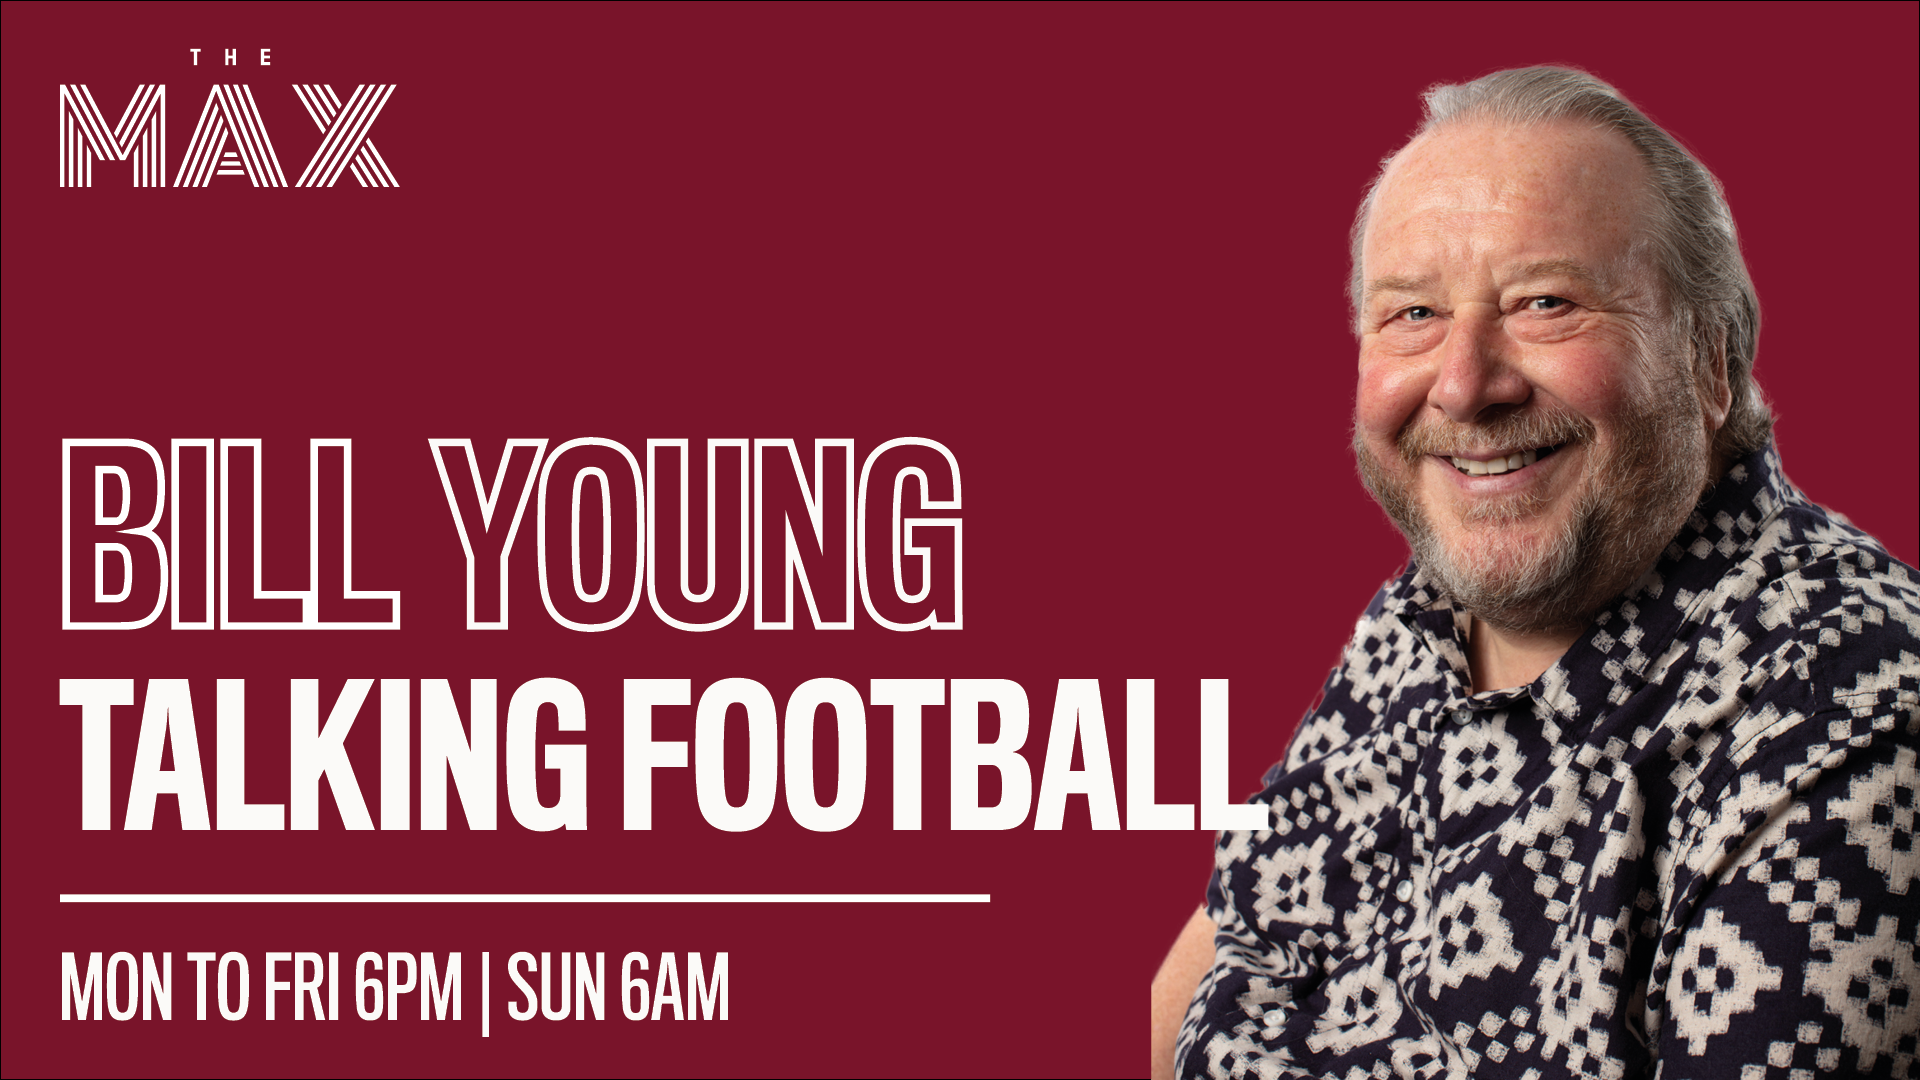 Talking Football with Bill Young - Wednesday 14th April